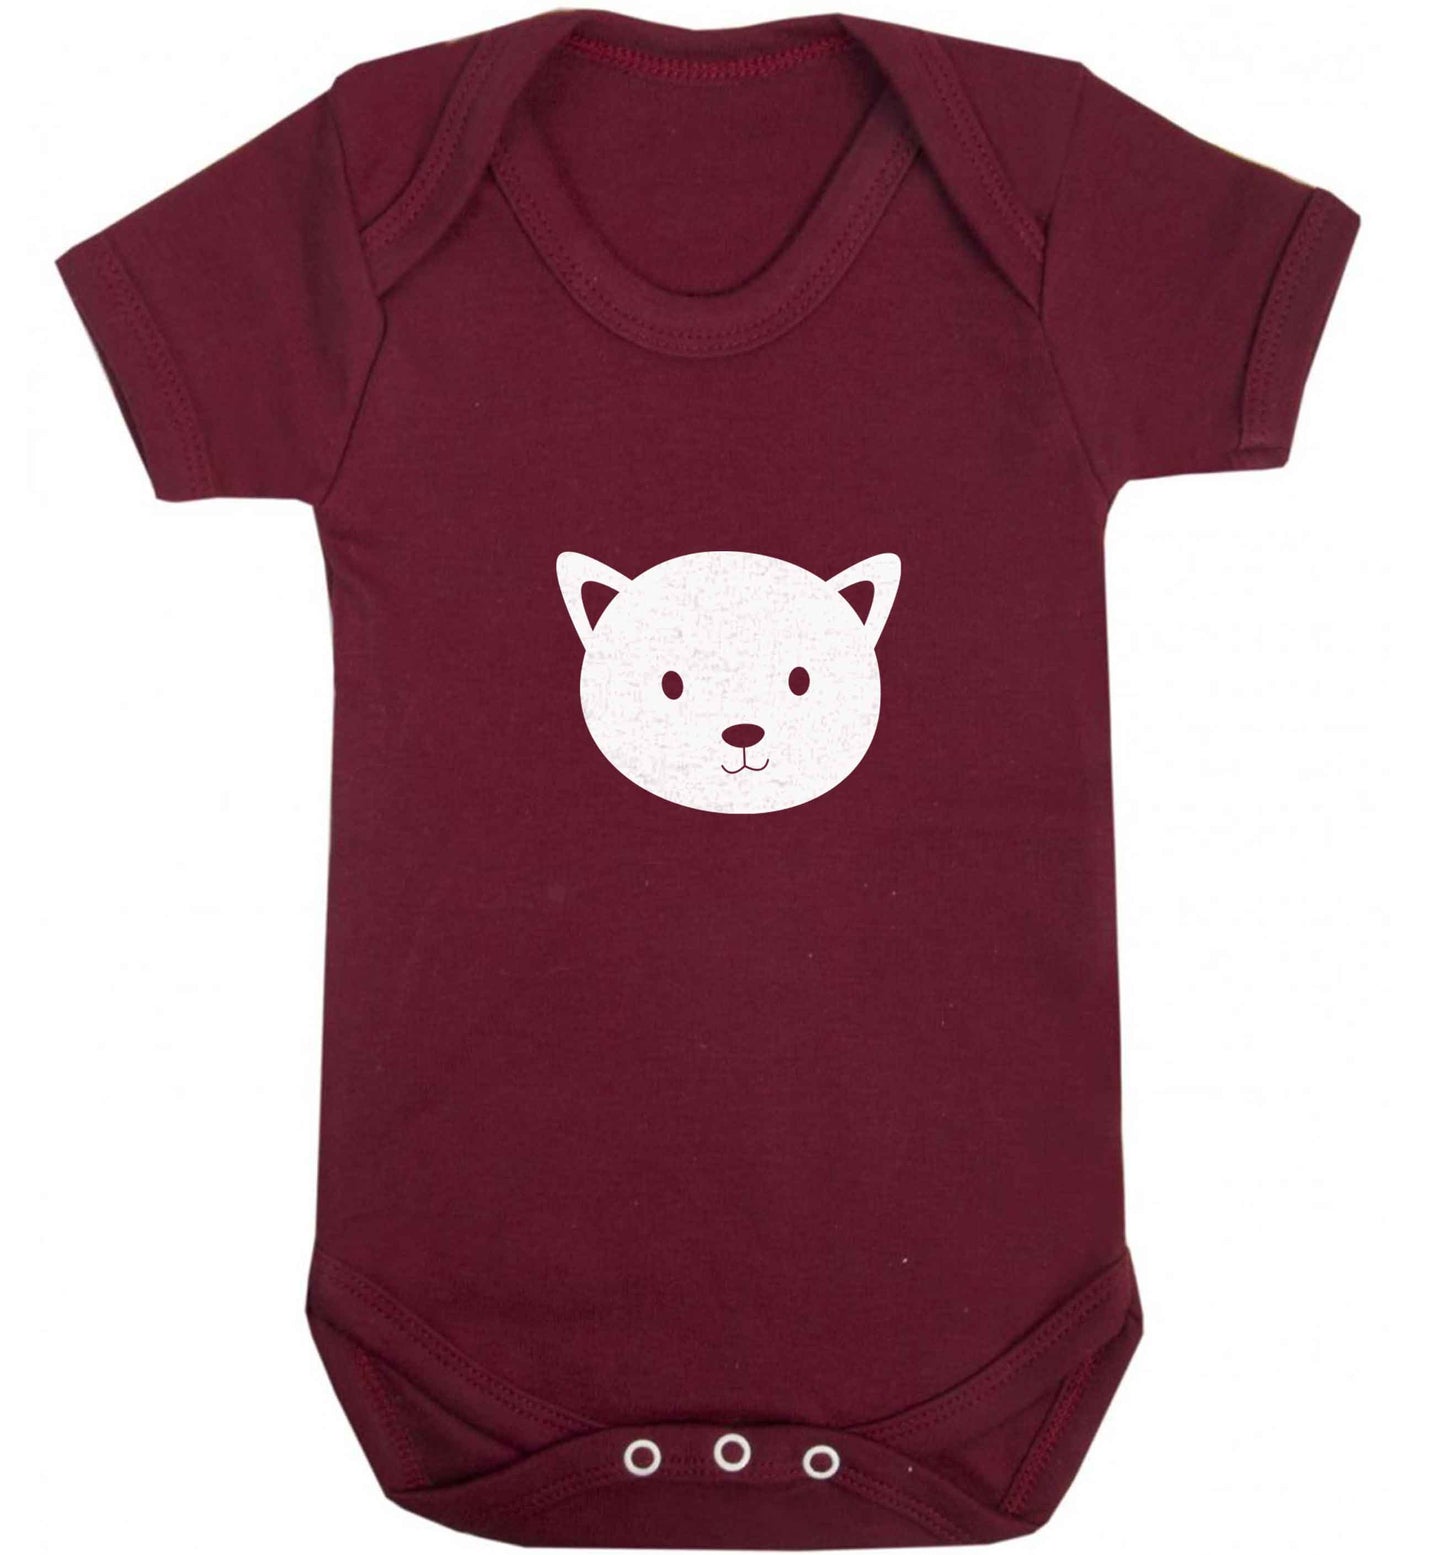 Cat face only Kit baby vest maroon 18-24 months